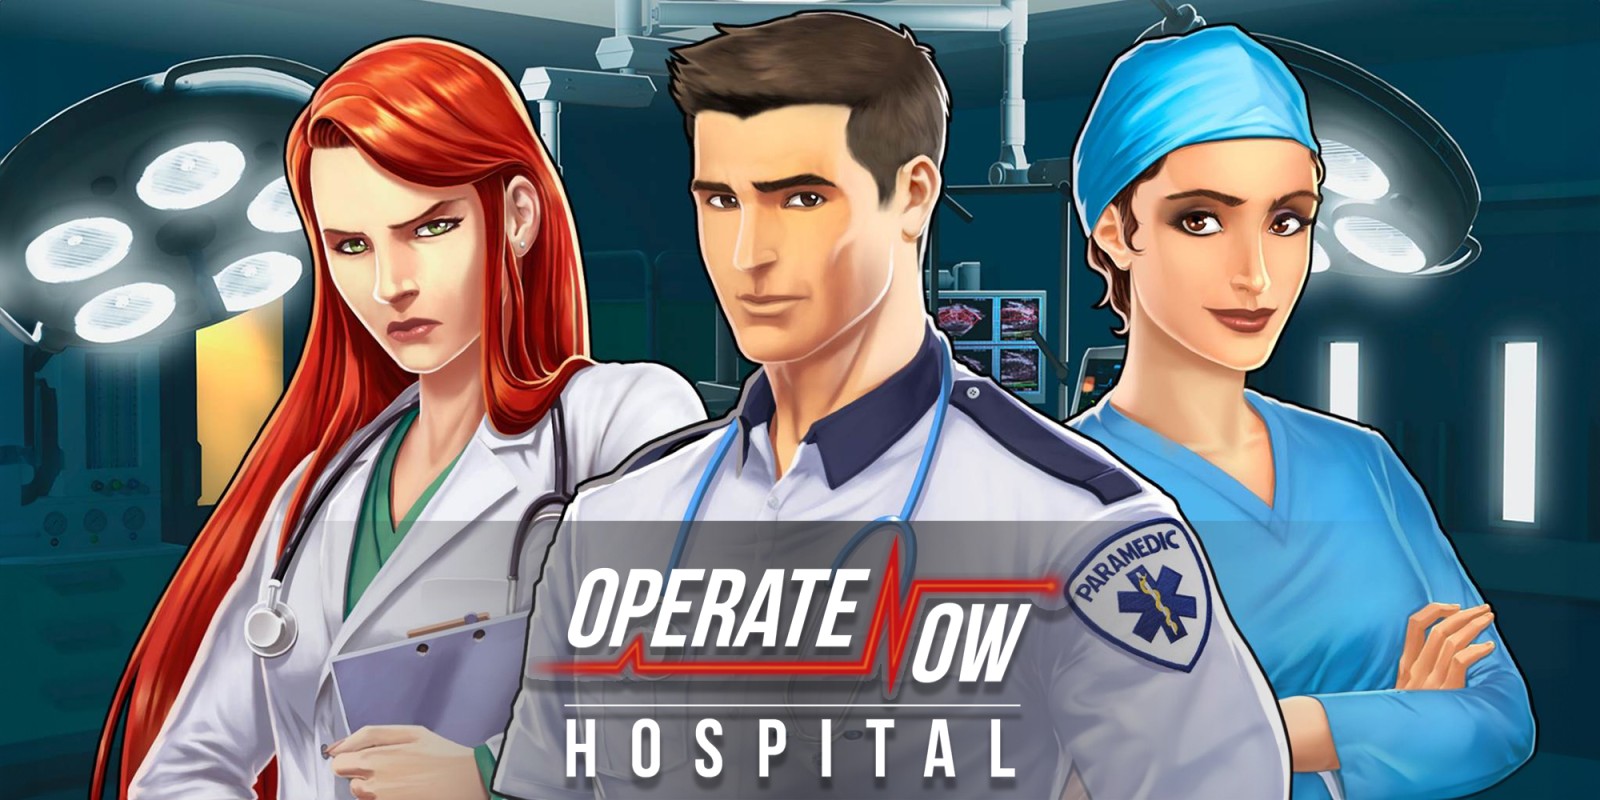 Operate Now: Hospital